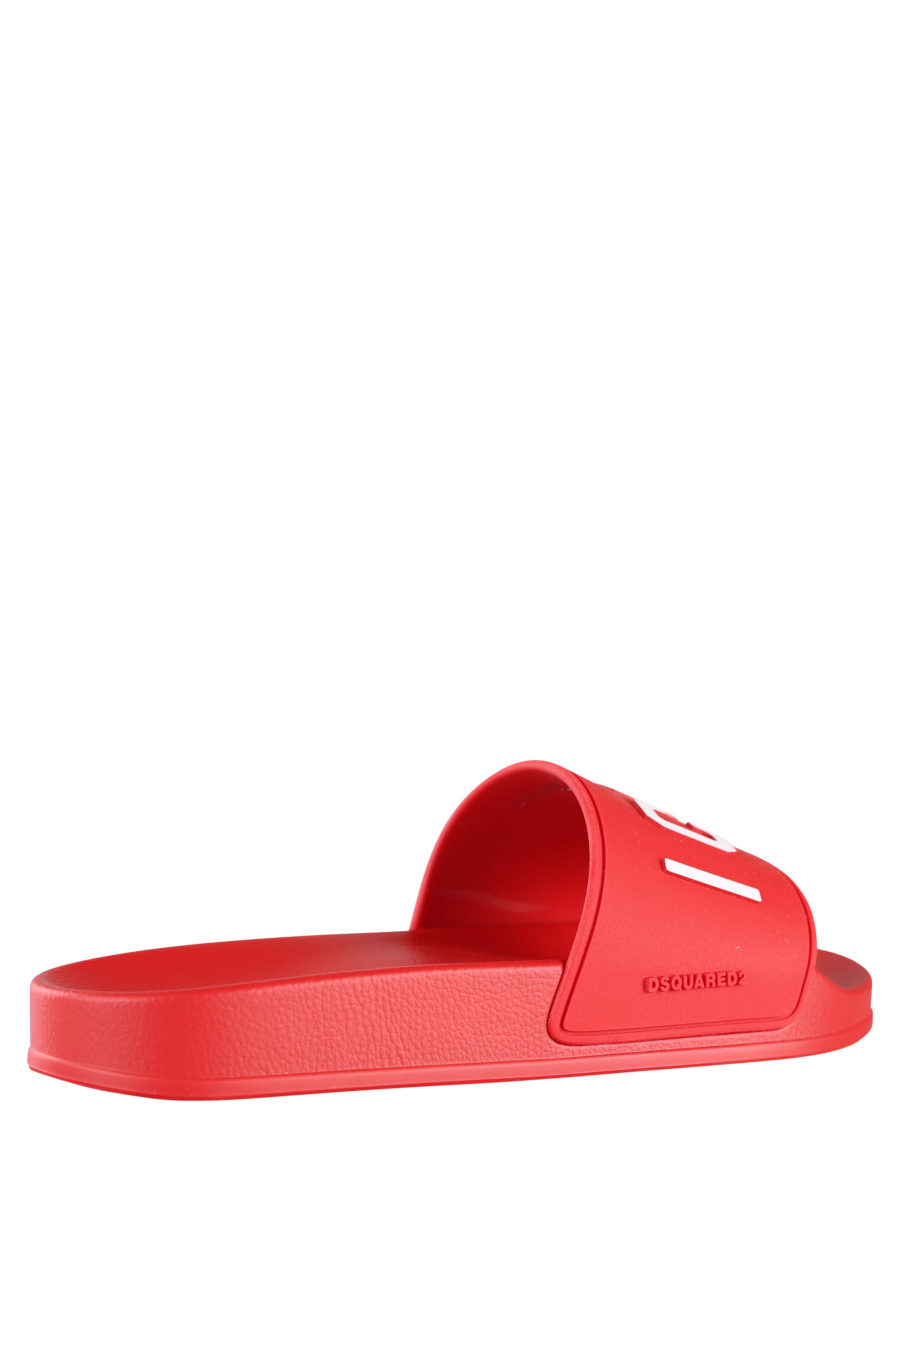 Red flip flops with white "icon" logo - IMG 9942